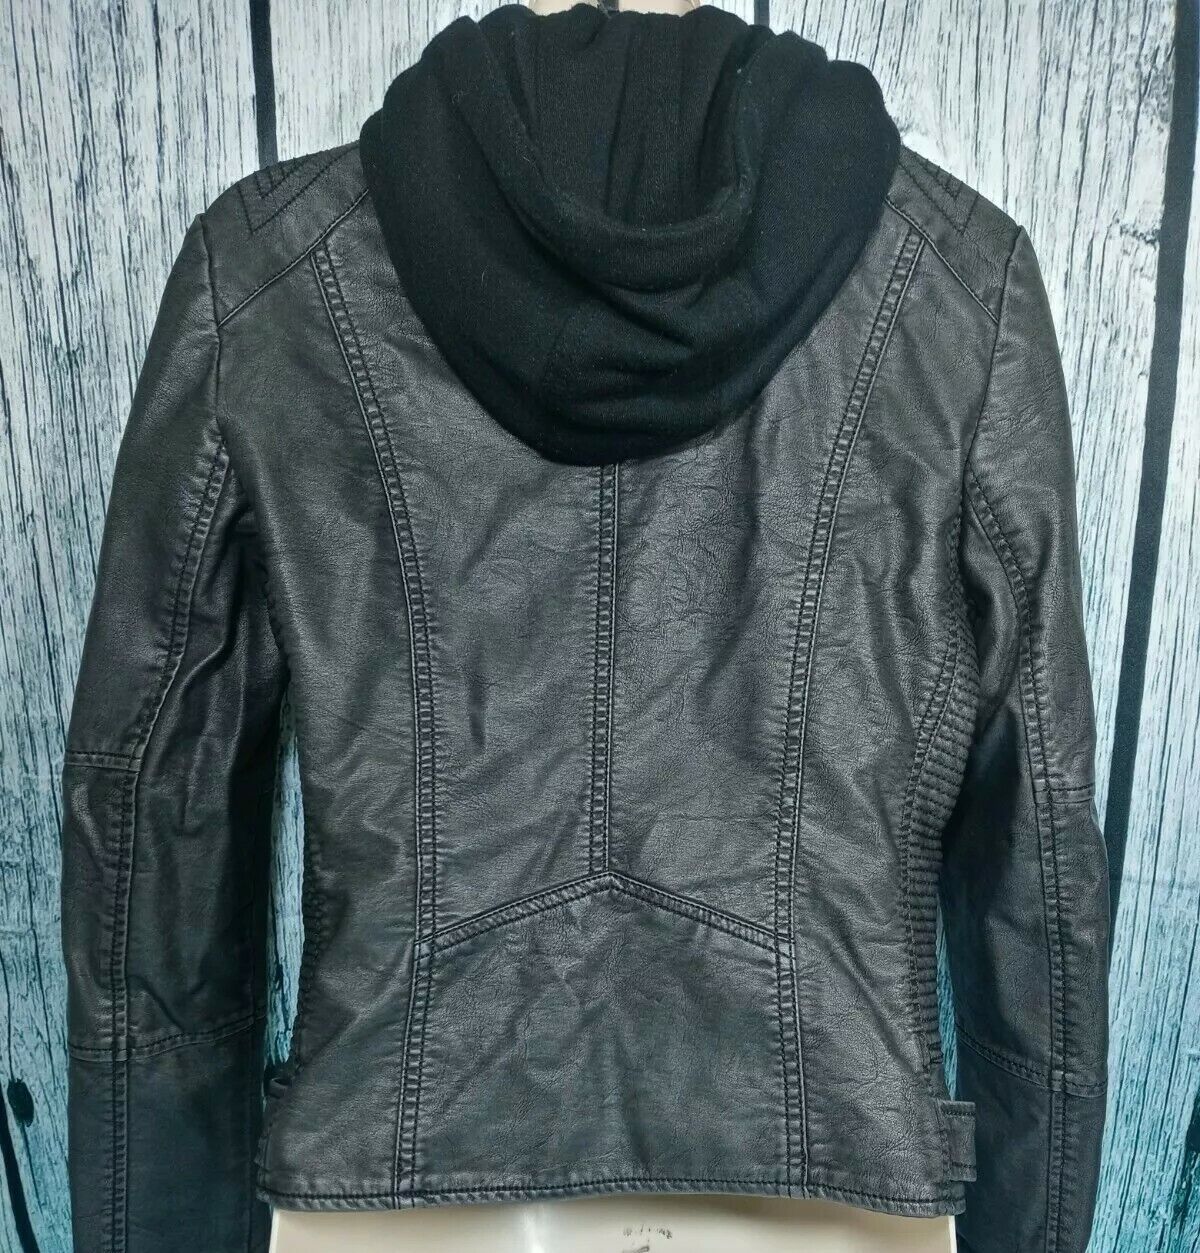 Lock and Love Womens Faux Leather Black Hooded Jacket Size XS | eBay